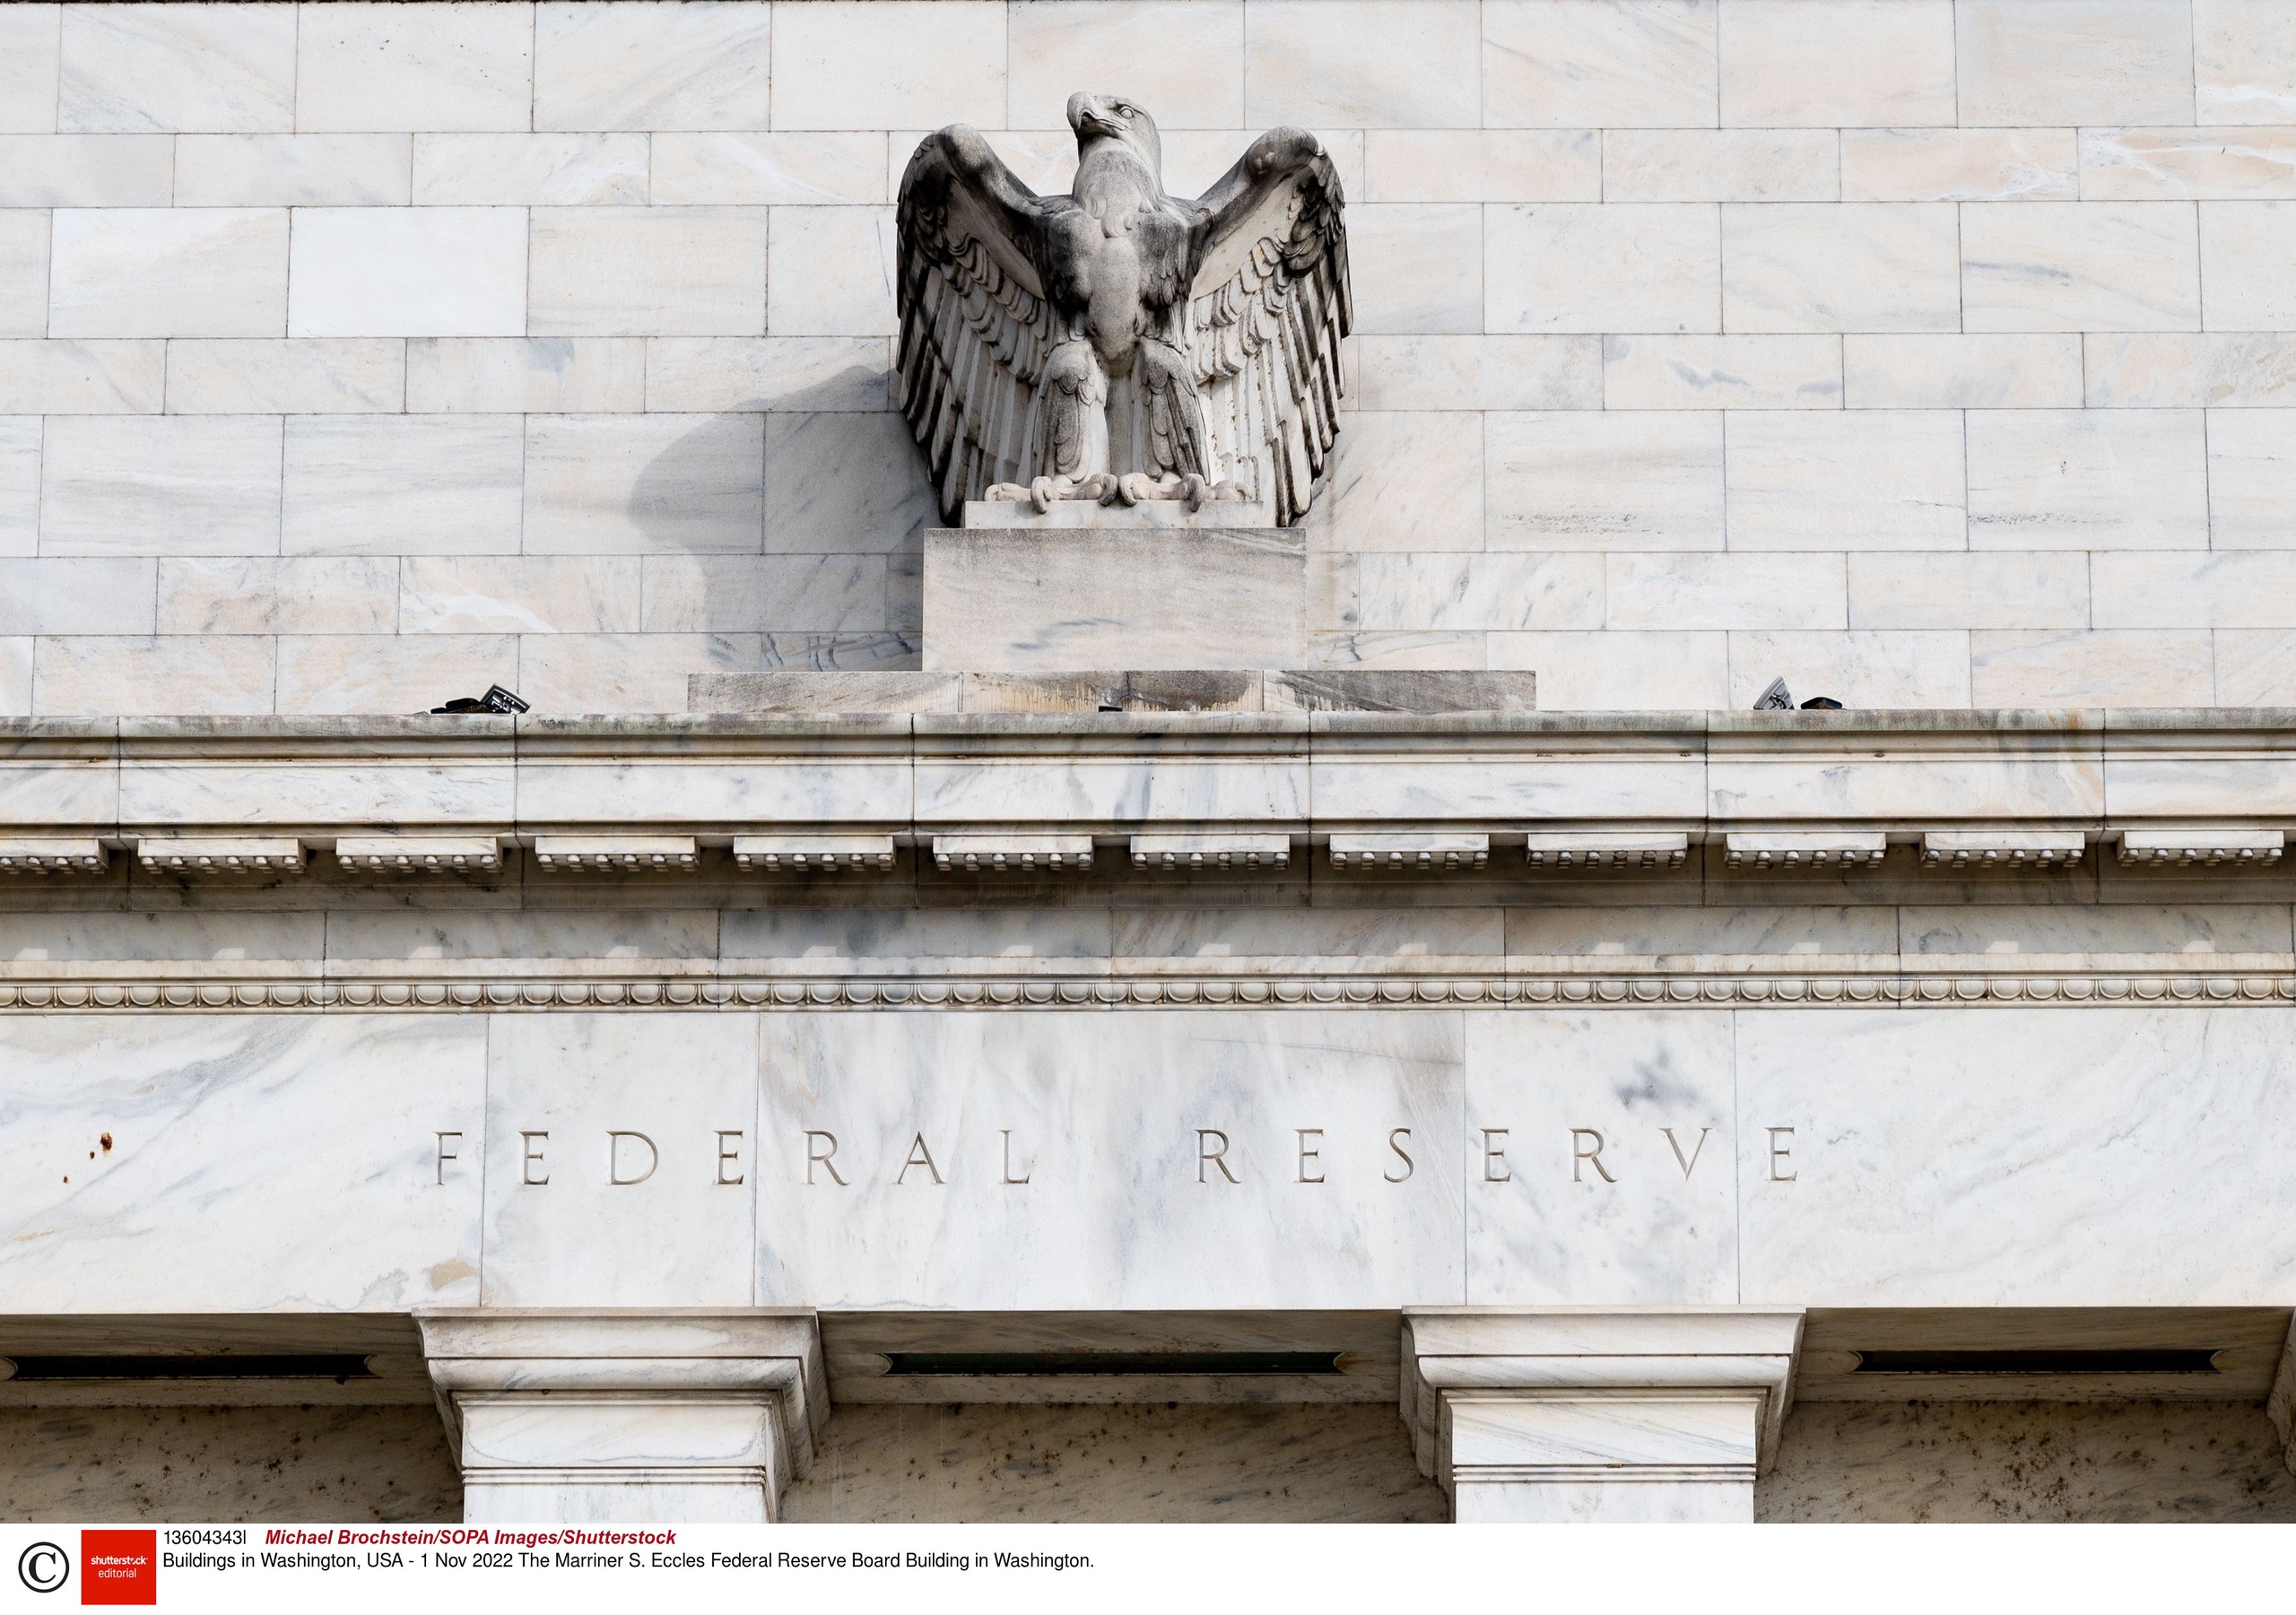 The Federal Reserve raised US interest rates by 0.25 percent.  Although an increase was expected, it is lower than in recent times.